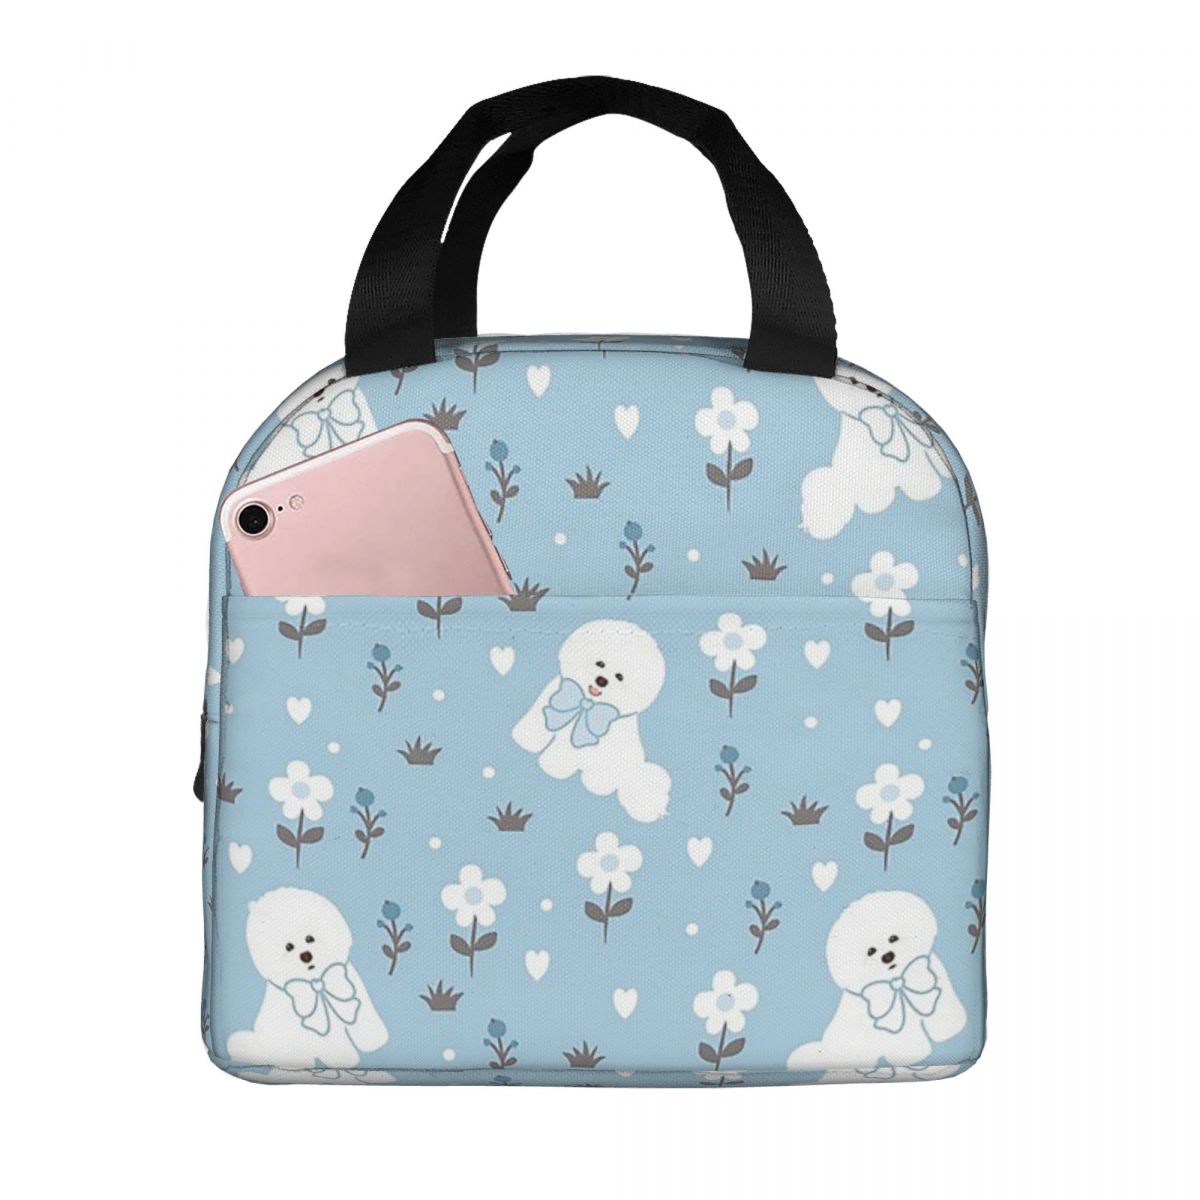 Bowtie Bichon Frise Love Insulated Lunch Bag with Exterior Pocket